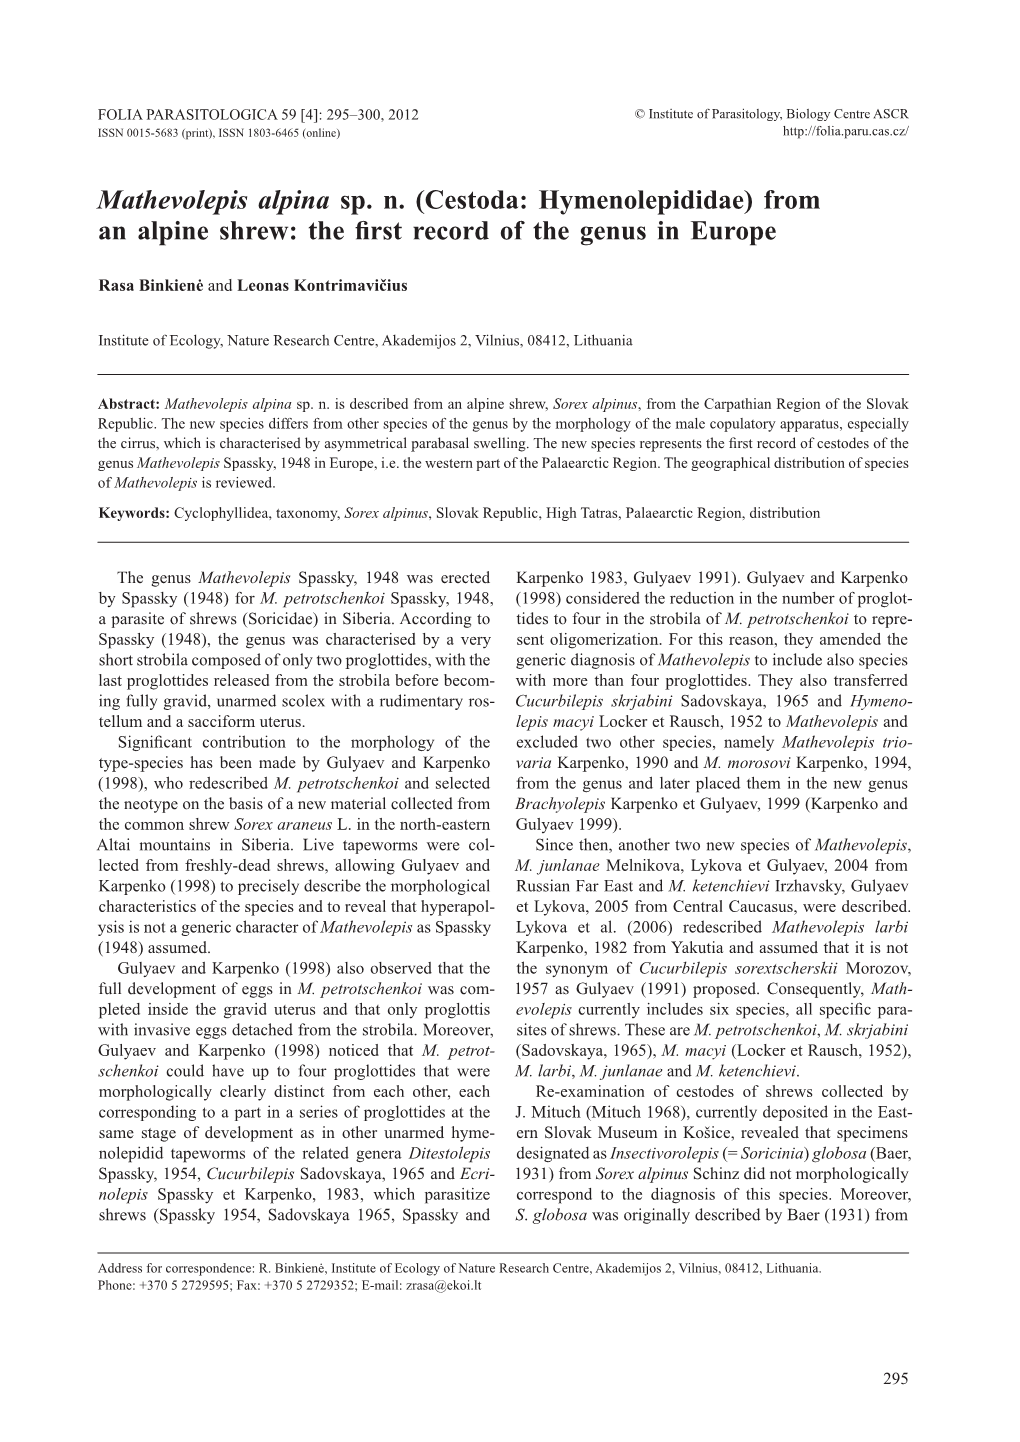 (Cestoda: Hymenolepididae) from an Alpine Shrew: the First Record of the Genus in Europe